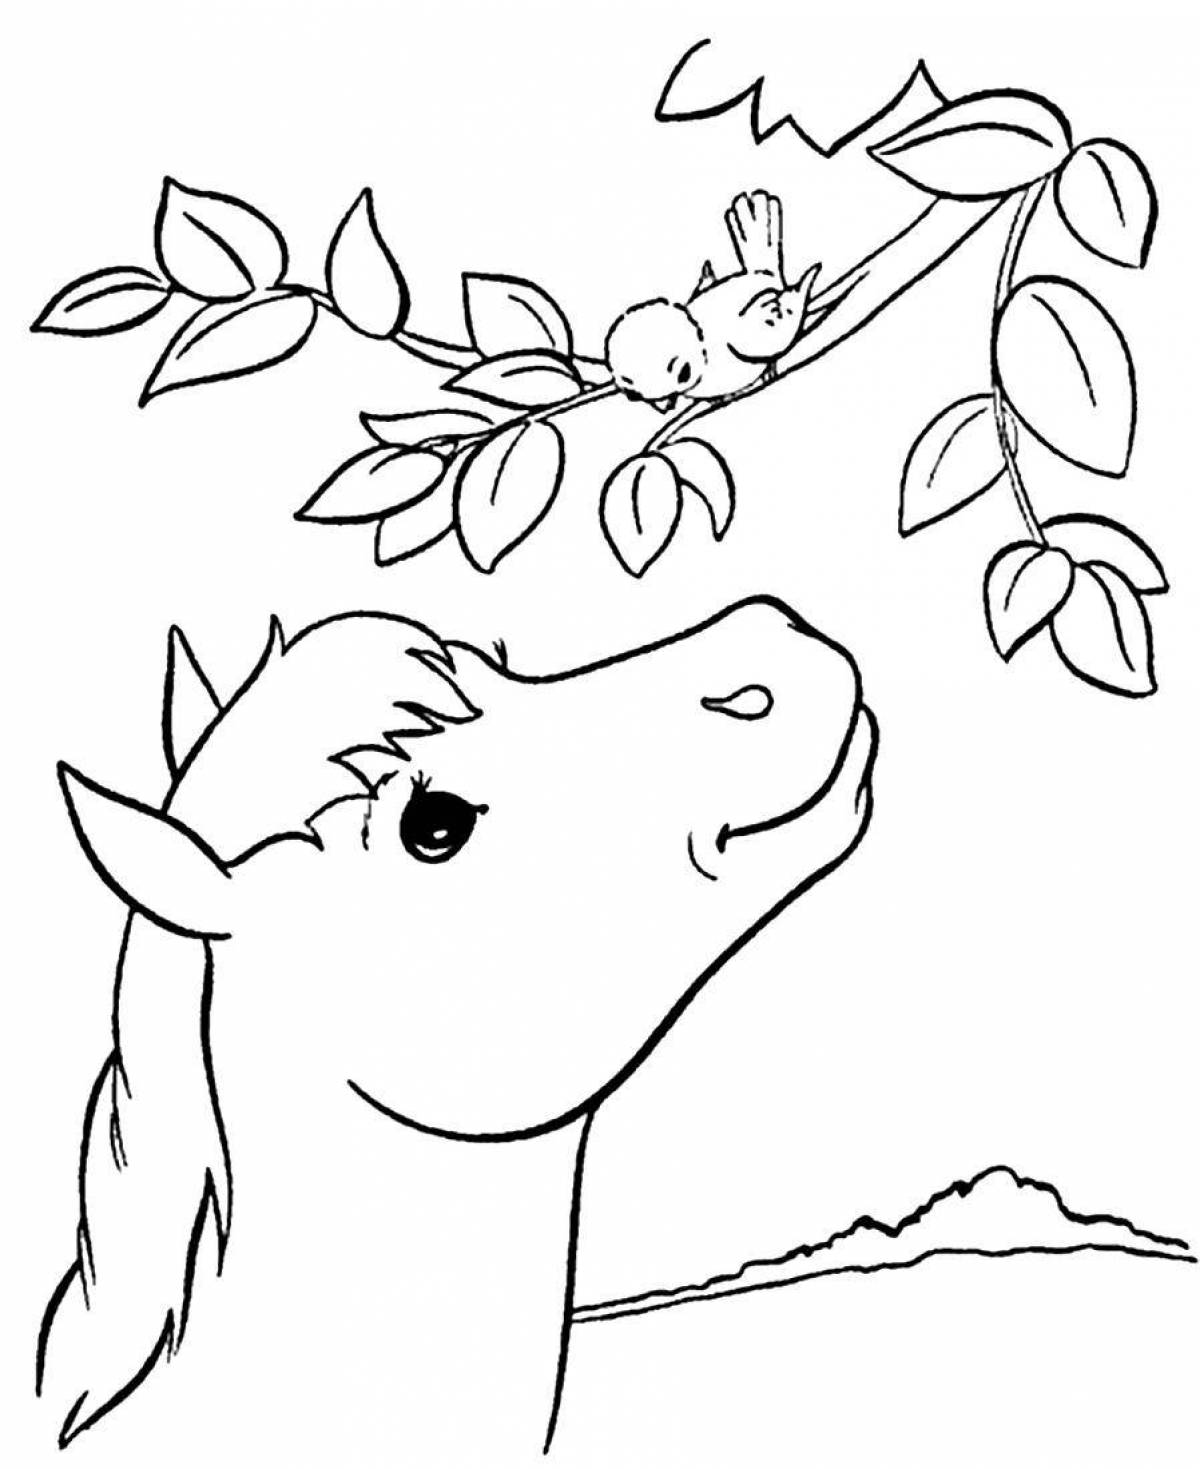 Fun coloring pages with animals for 10 year olds